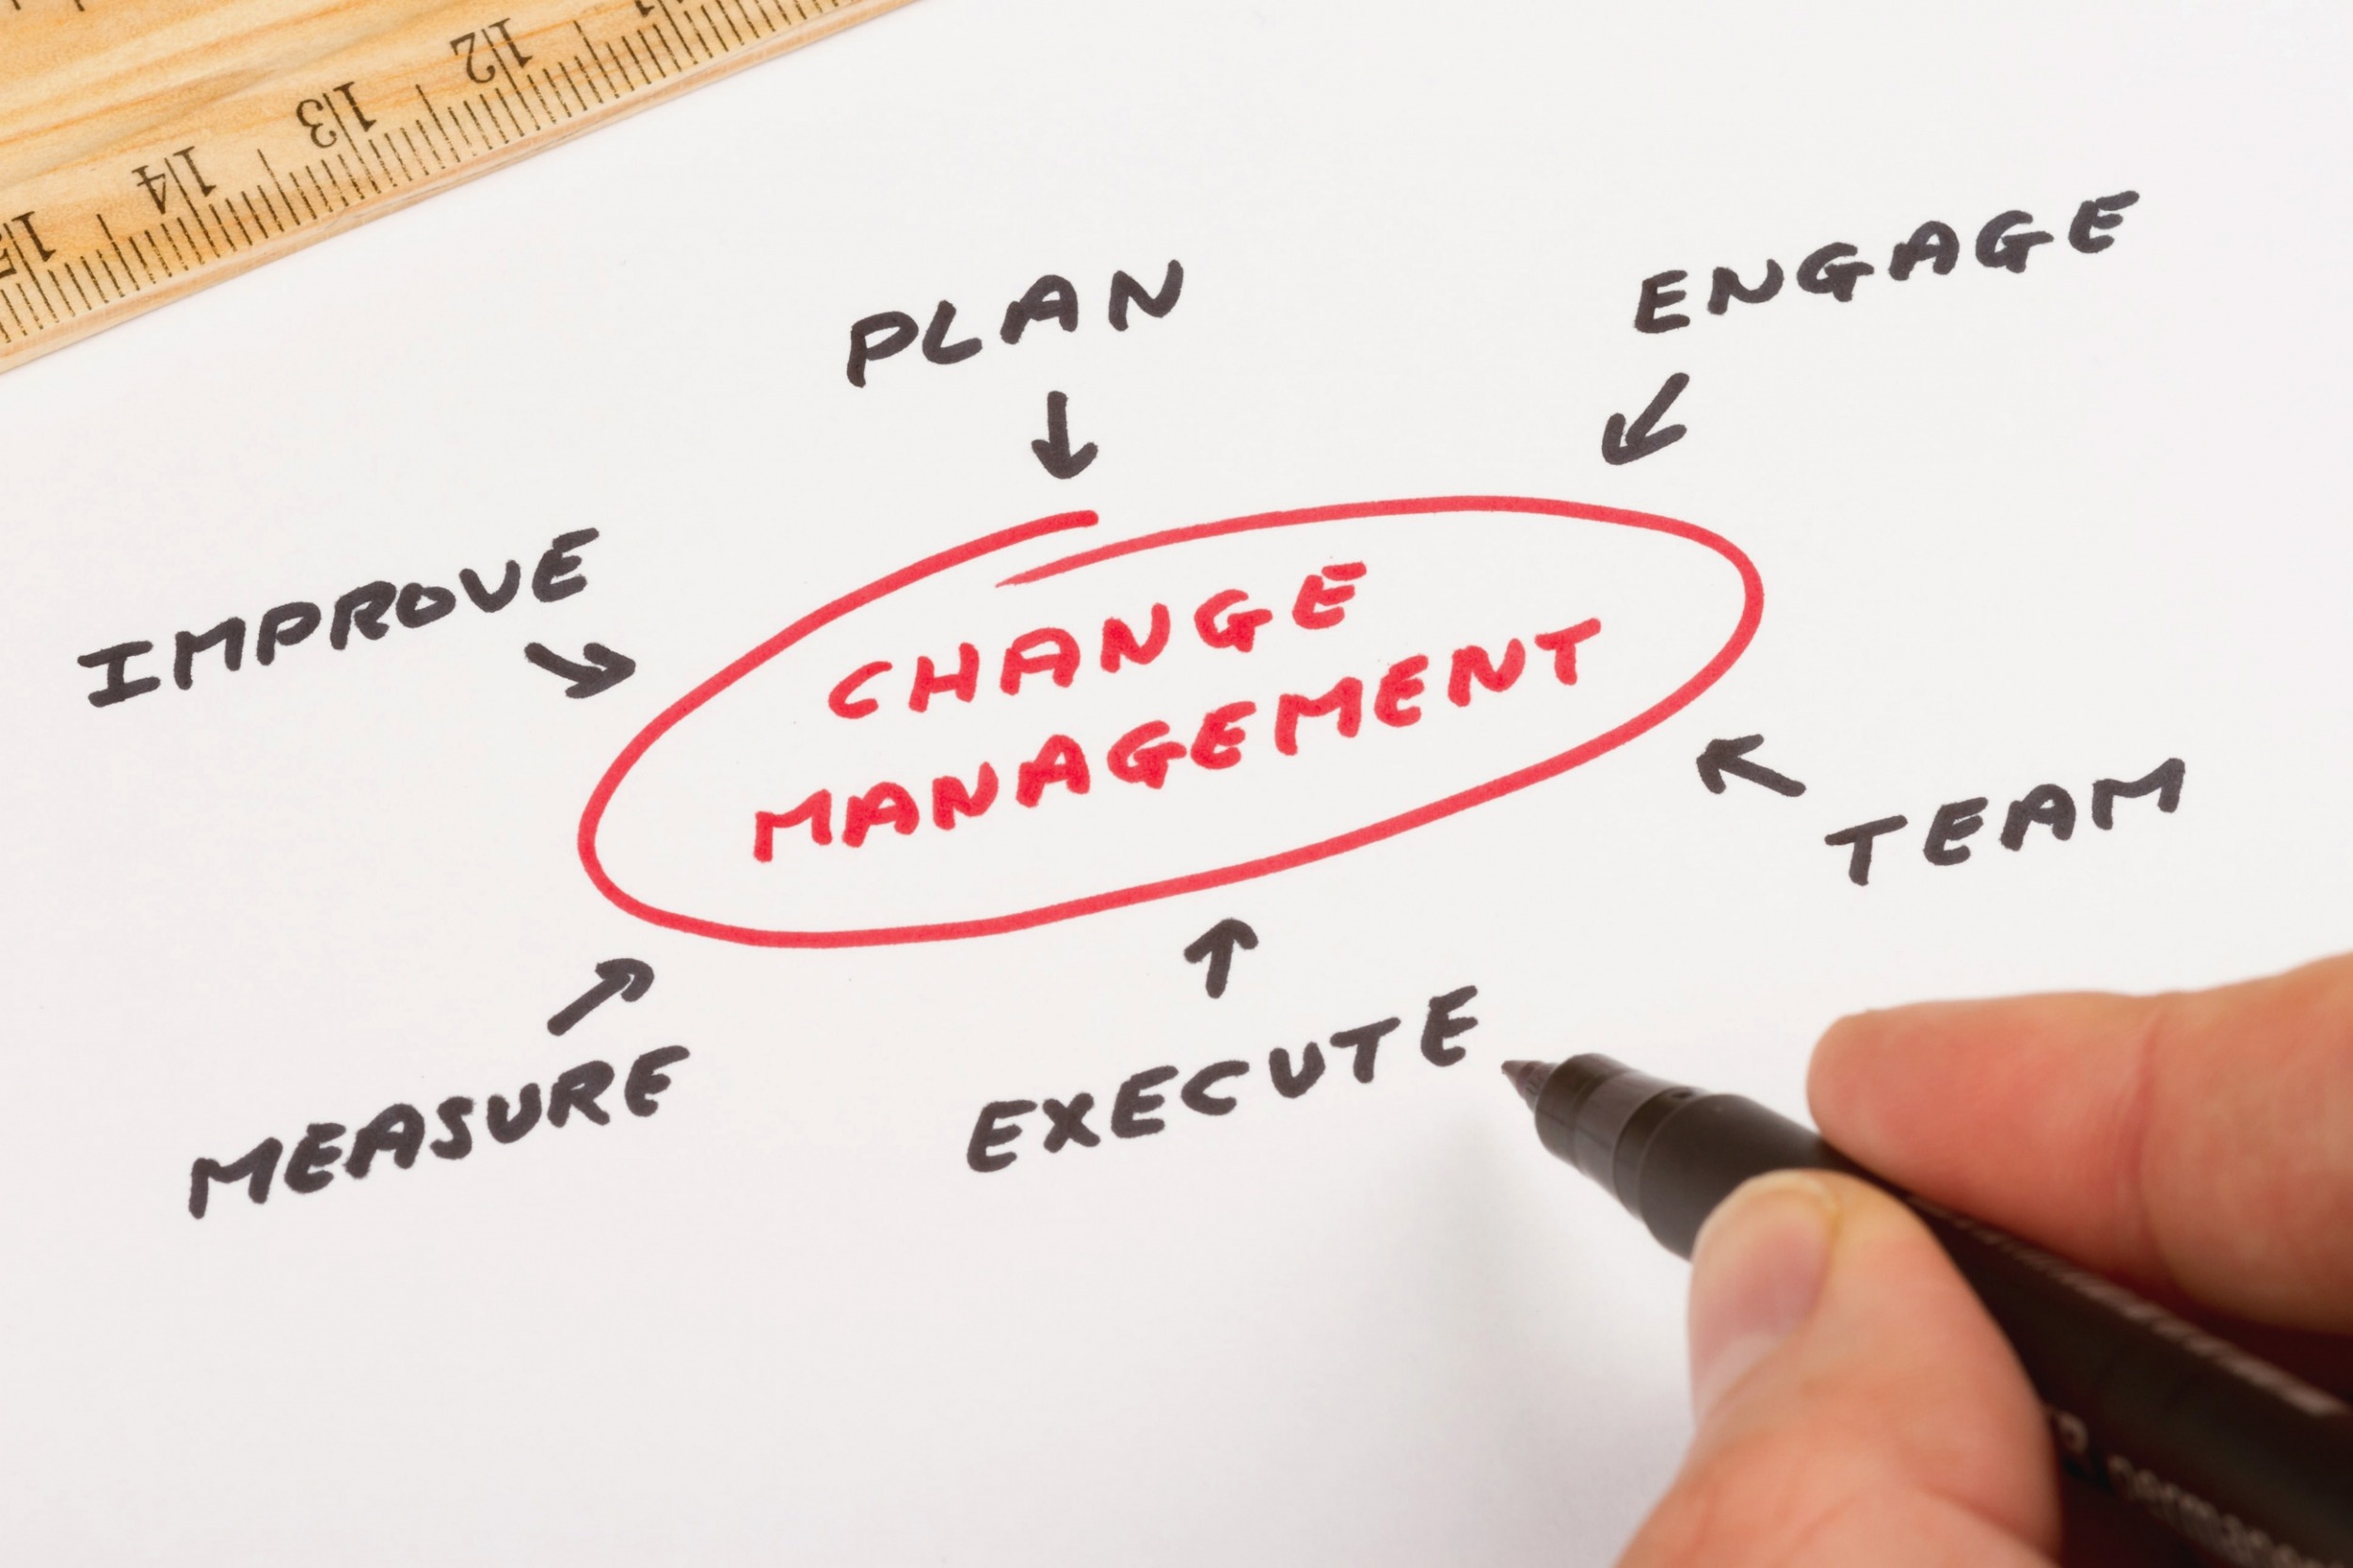 Change Management software: Plan, Engage, Team, Execute, Measure, Improve